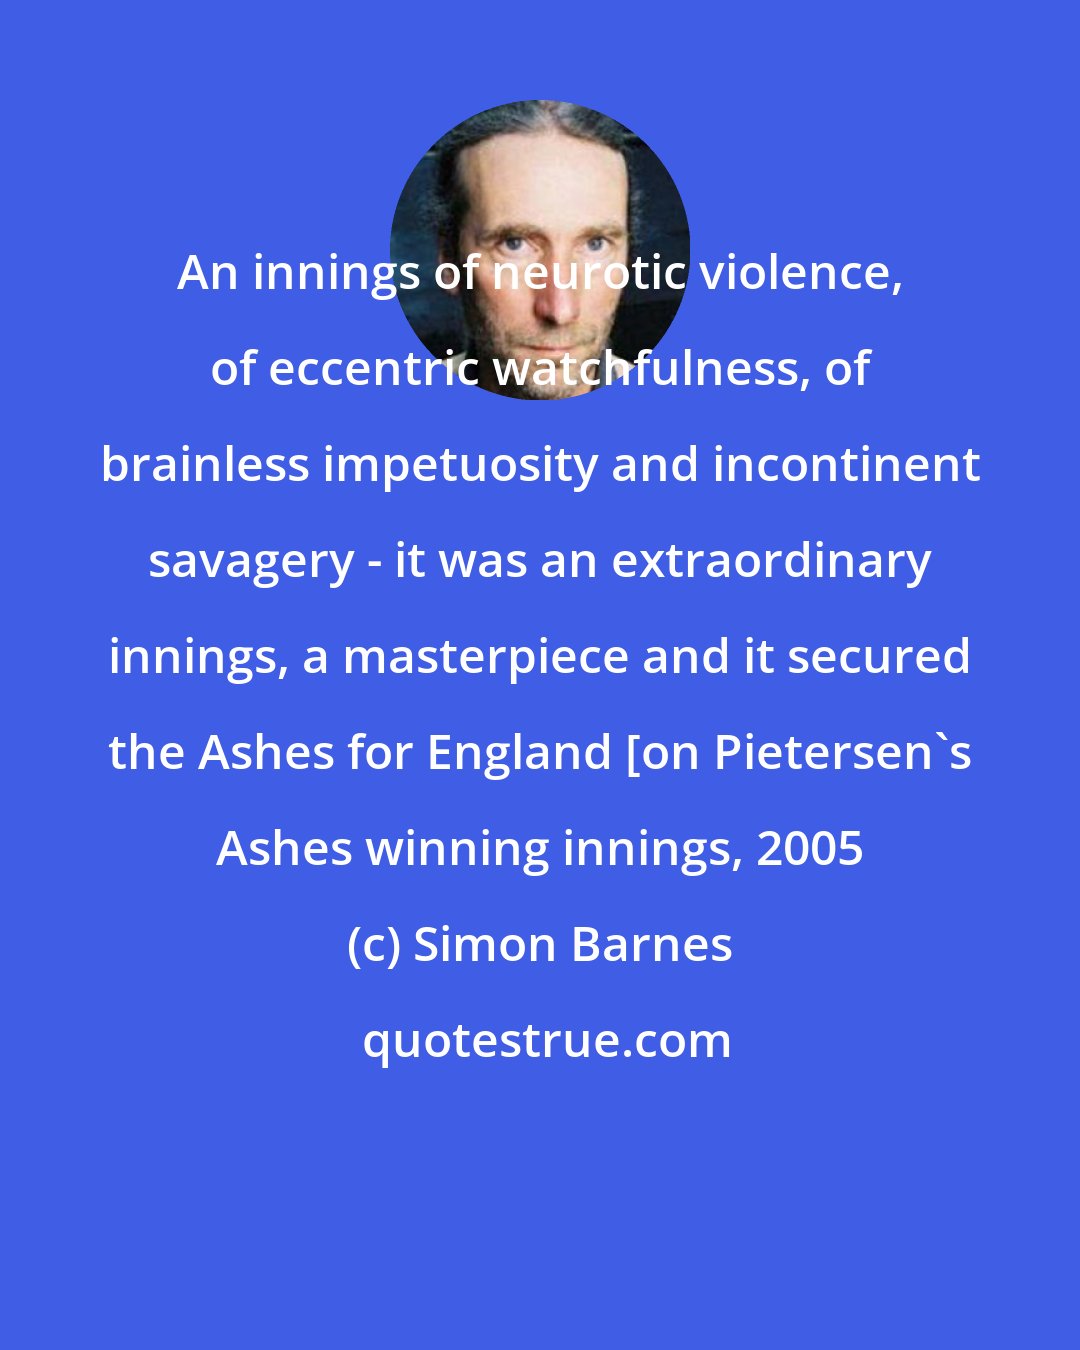 Simon Barnes: An innings of neurotic violence, of eccentric watchfulness, of brainless impetuosity and incontinent savagery - it was an extraordinary innings, a masterpiece and it secured the Ashes for England [on Pietersen's Ashes winning innings, 2005